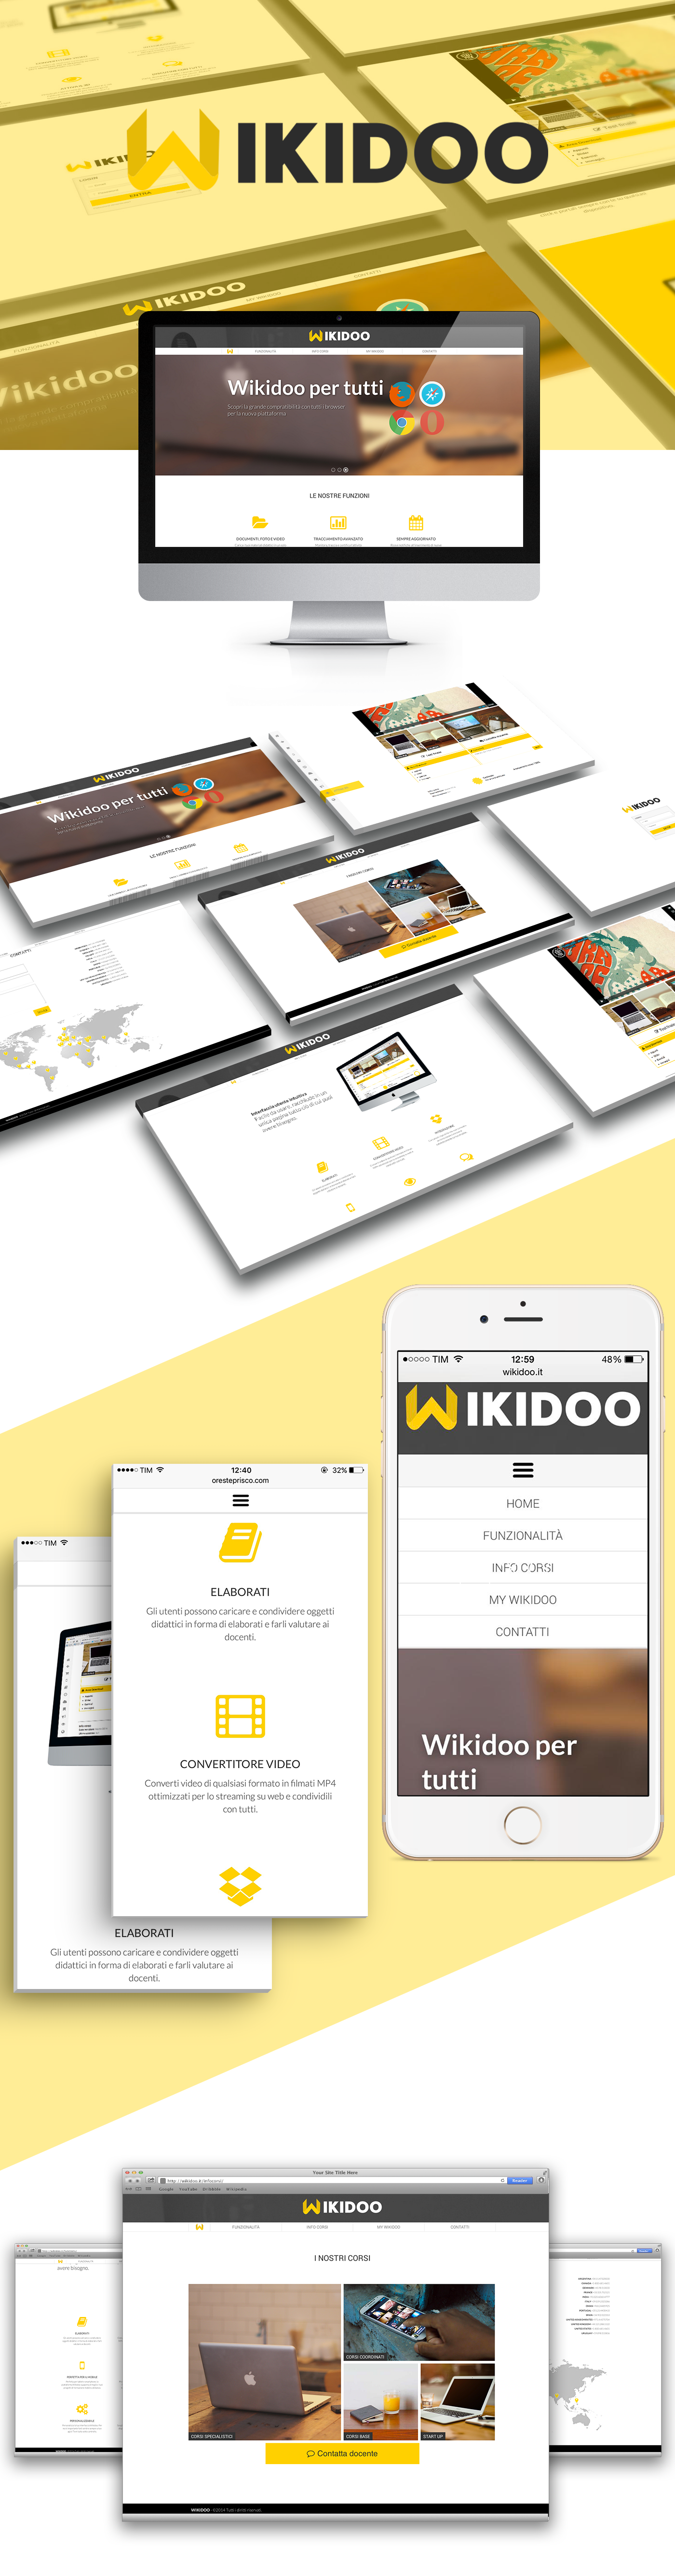 Web HTML css e-learning Mockup apple Responsive yellow 3D UI user Interface wikidoo.it wiki ux